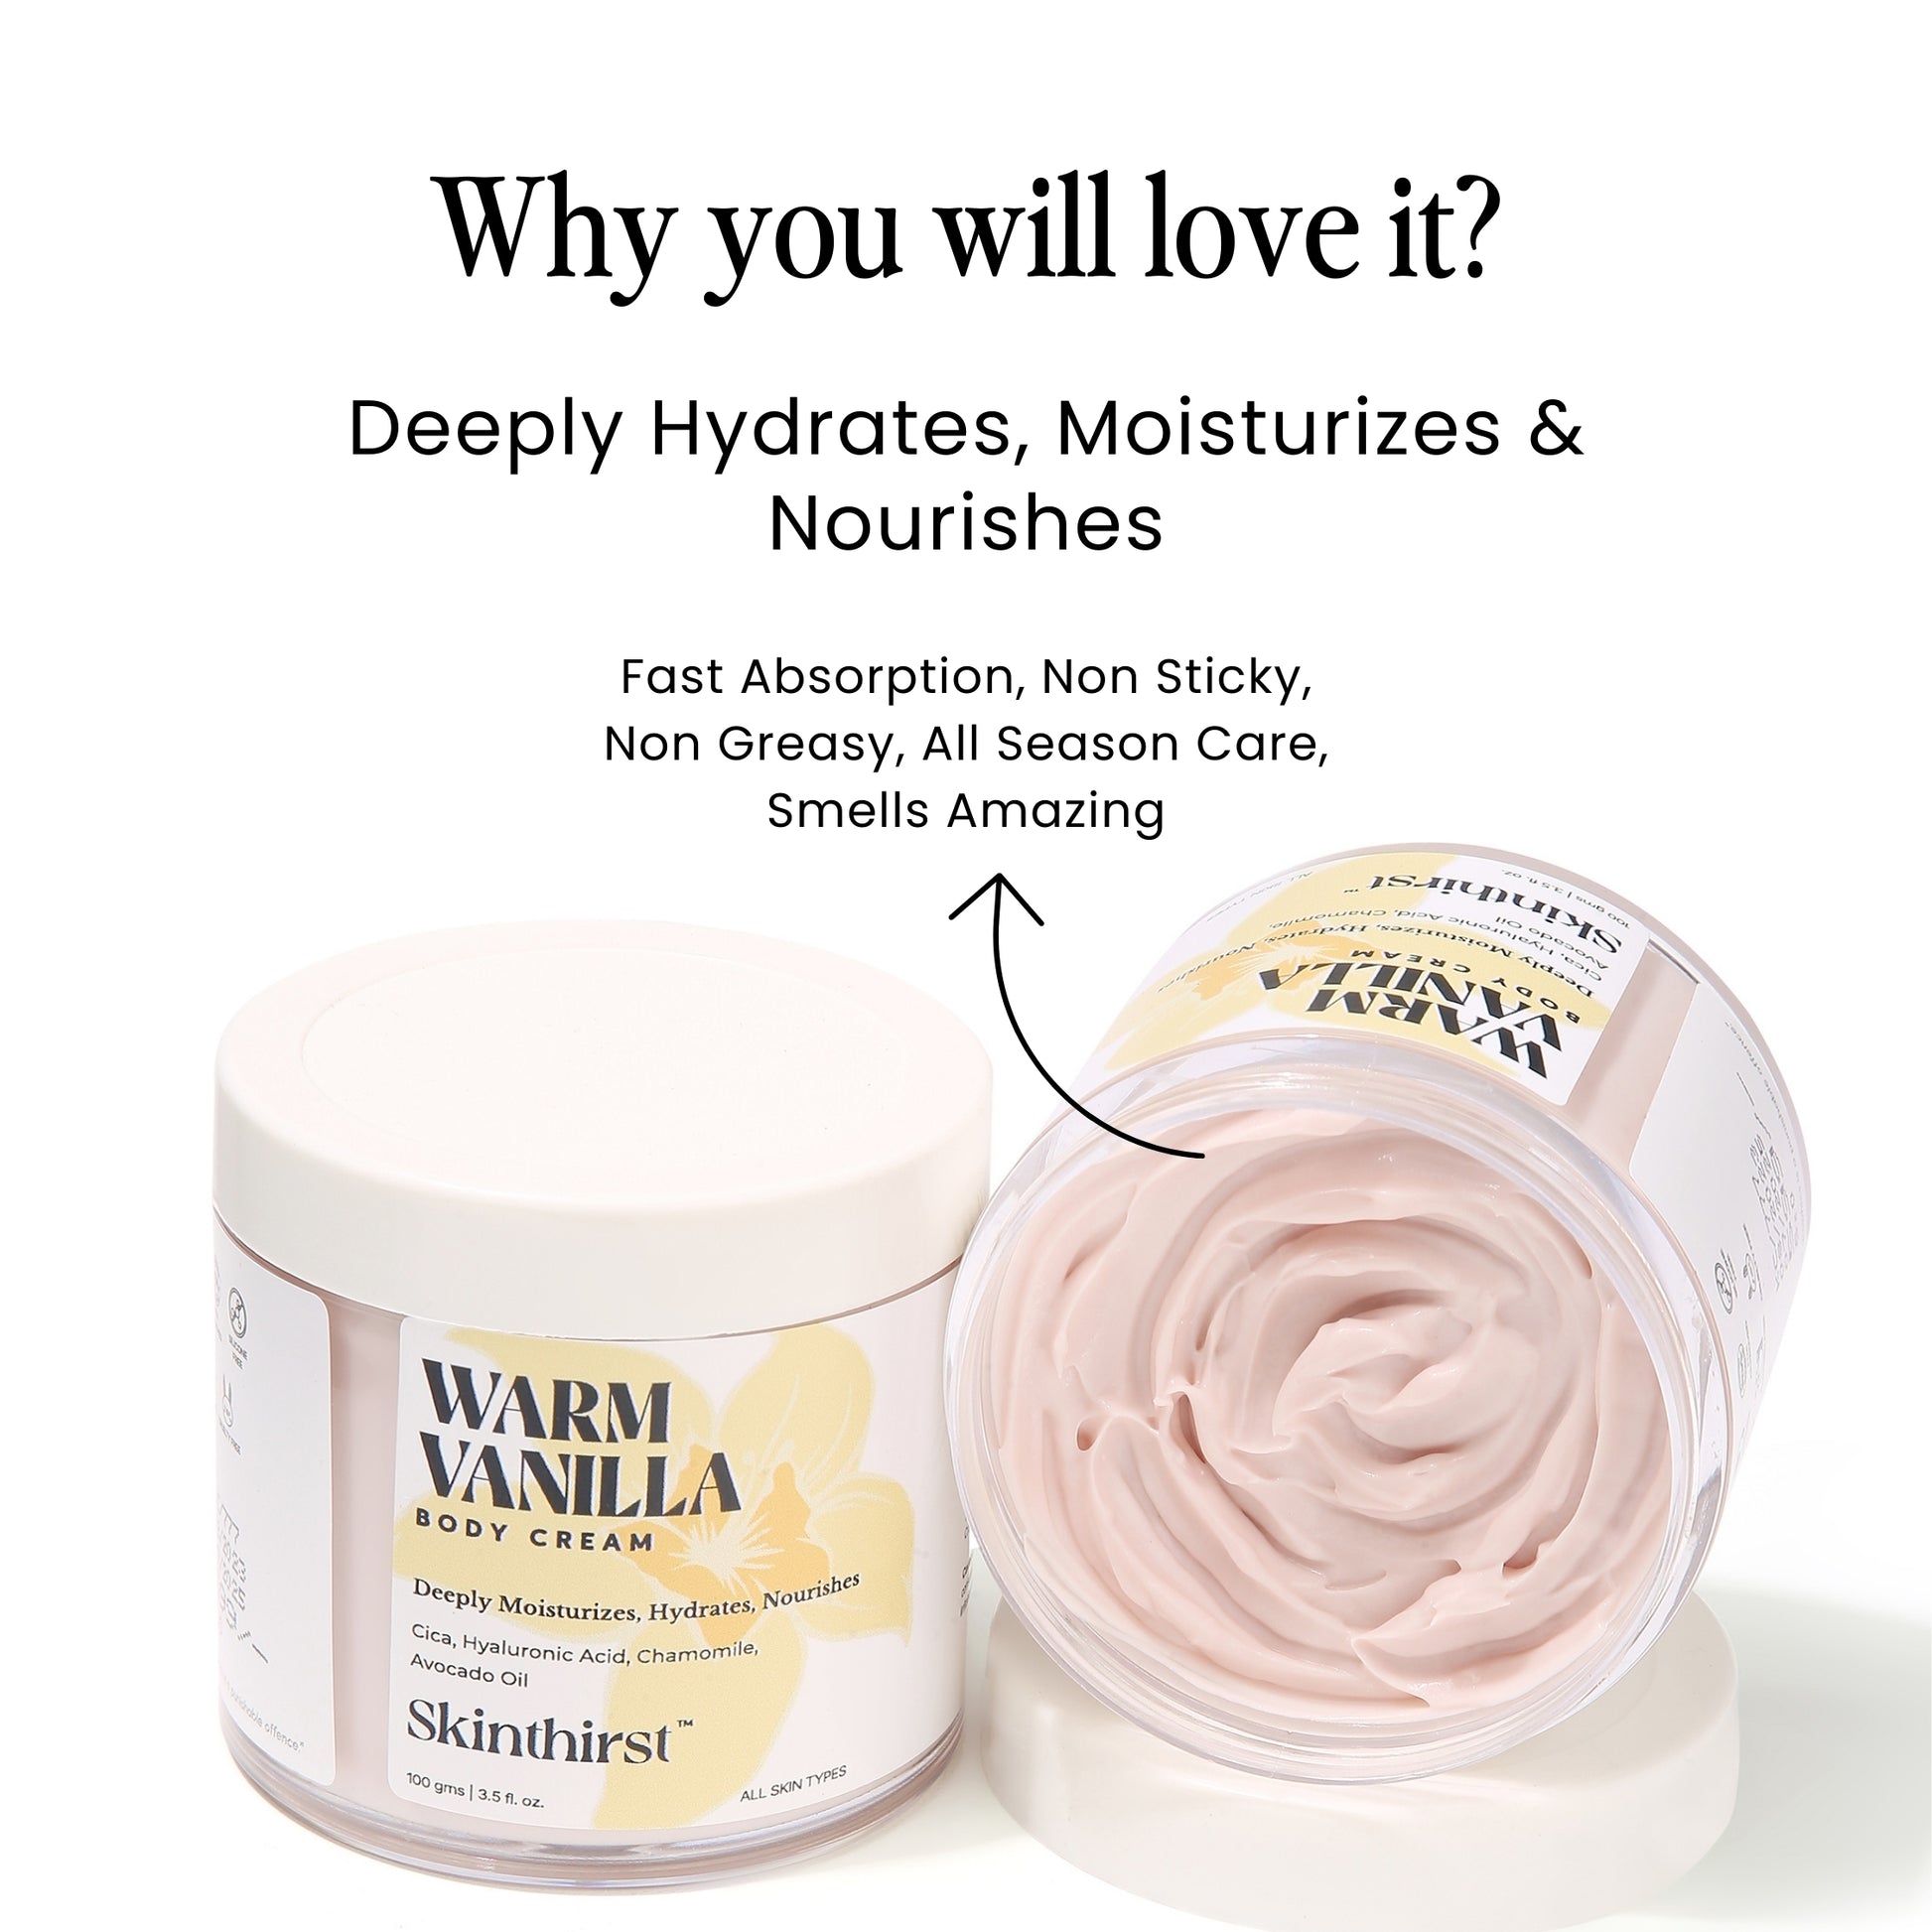 non sticky non greasy body butter, it deeply hydrates, moisturizes and nourishes the skin